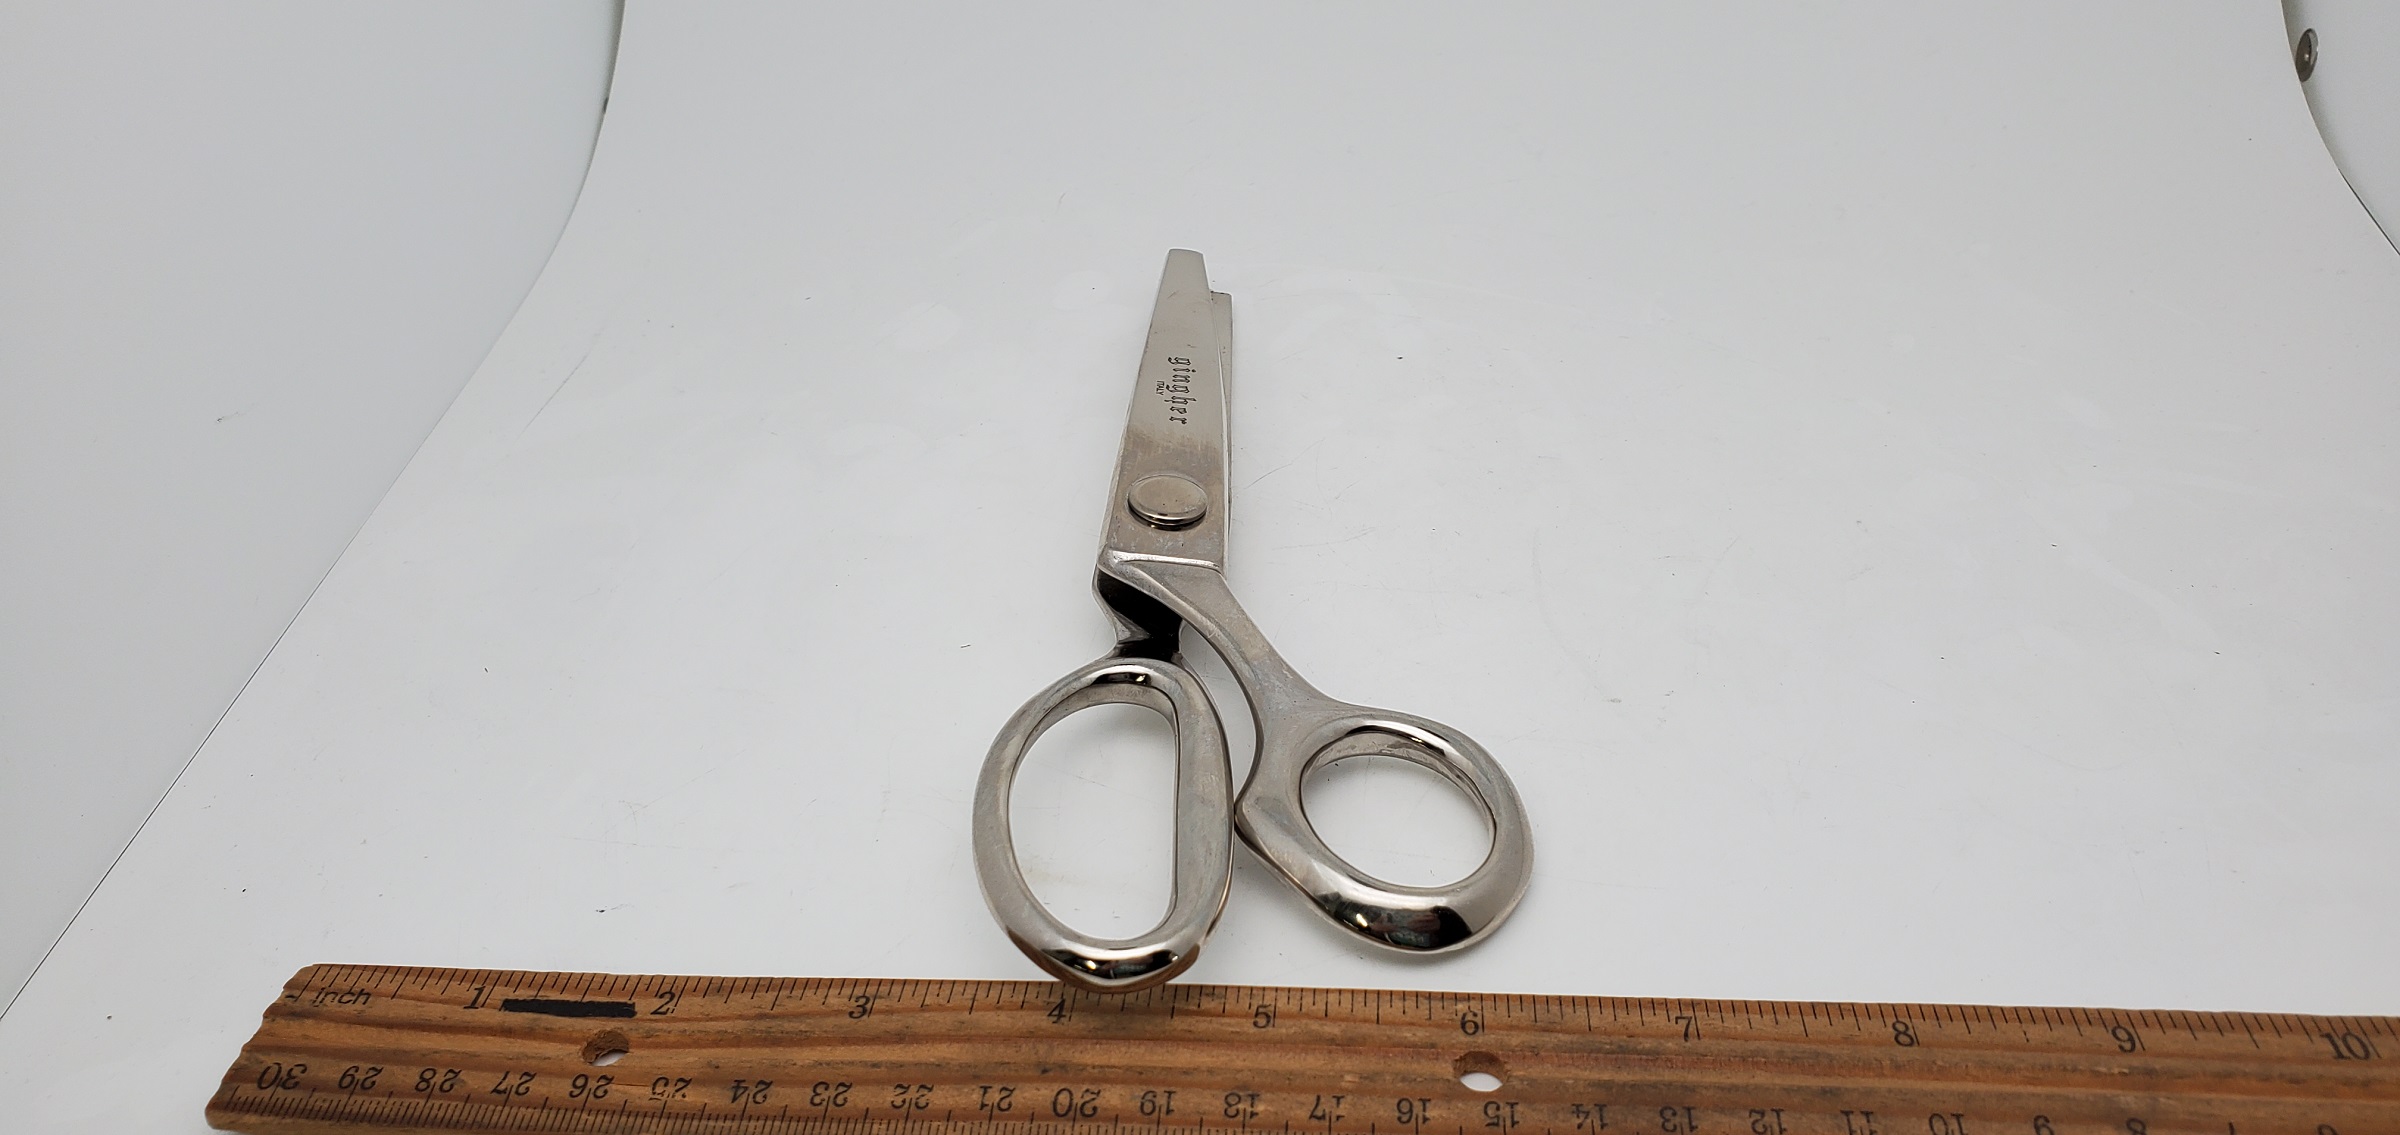 Gingher 7 1-2 Pinking Shears (G-7P)